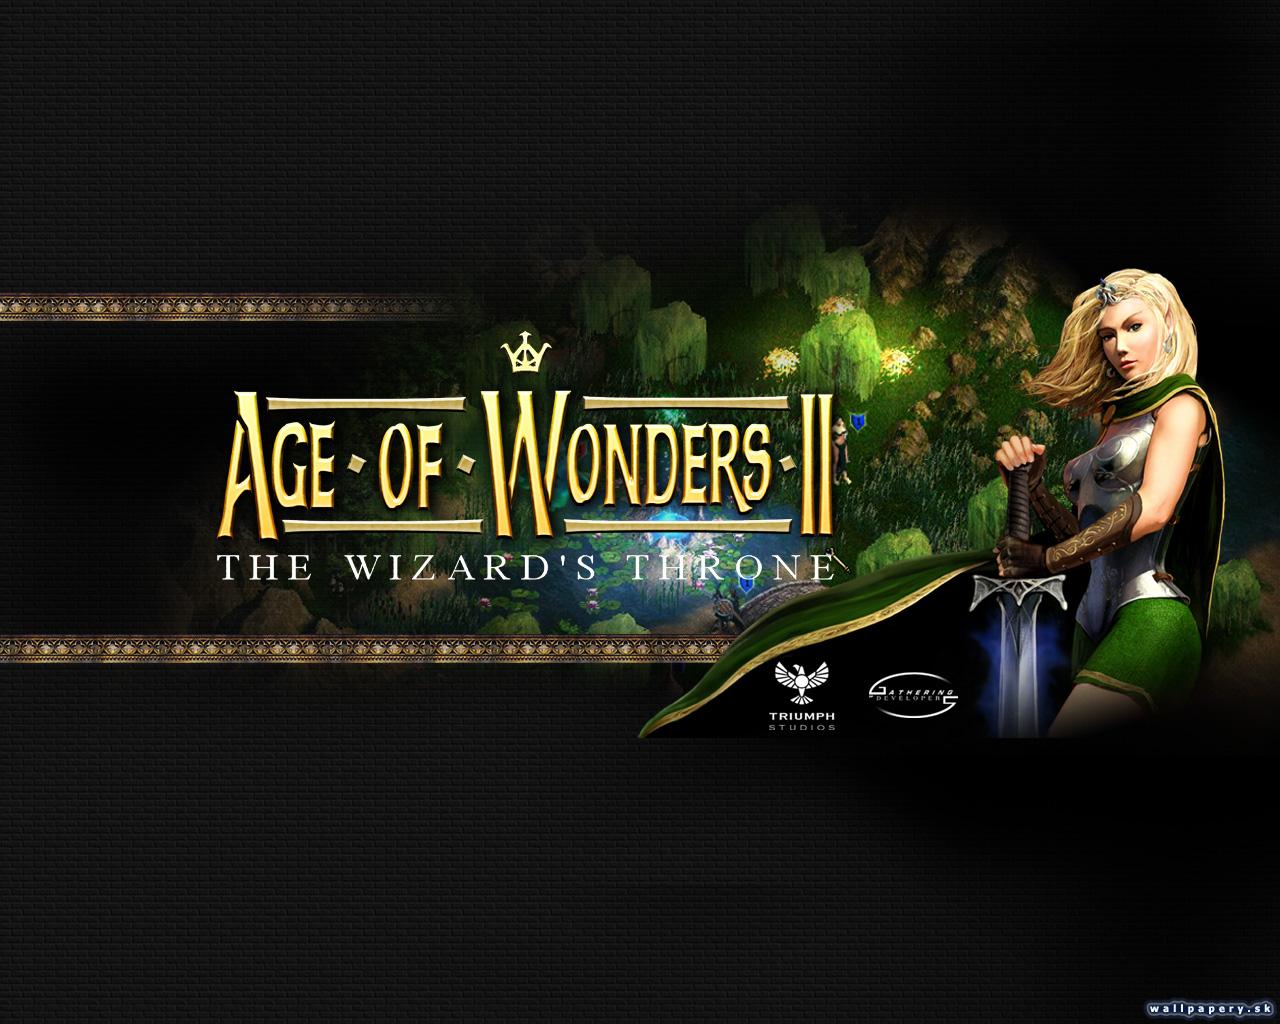 Age of Wonders 2: The Wizard's Throne - wallpaper 6